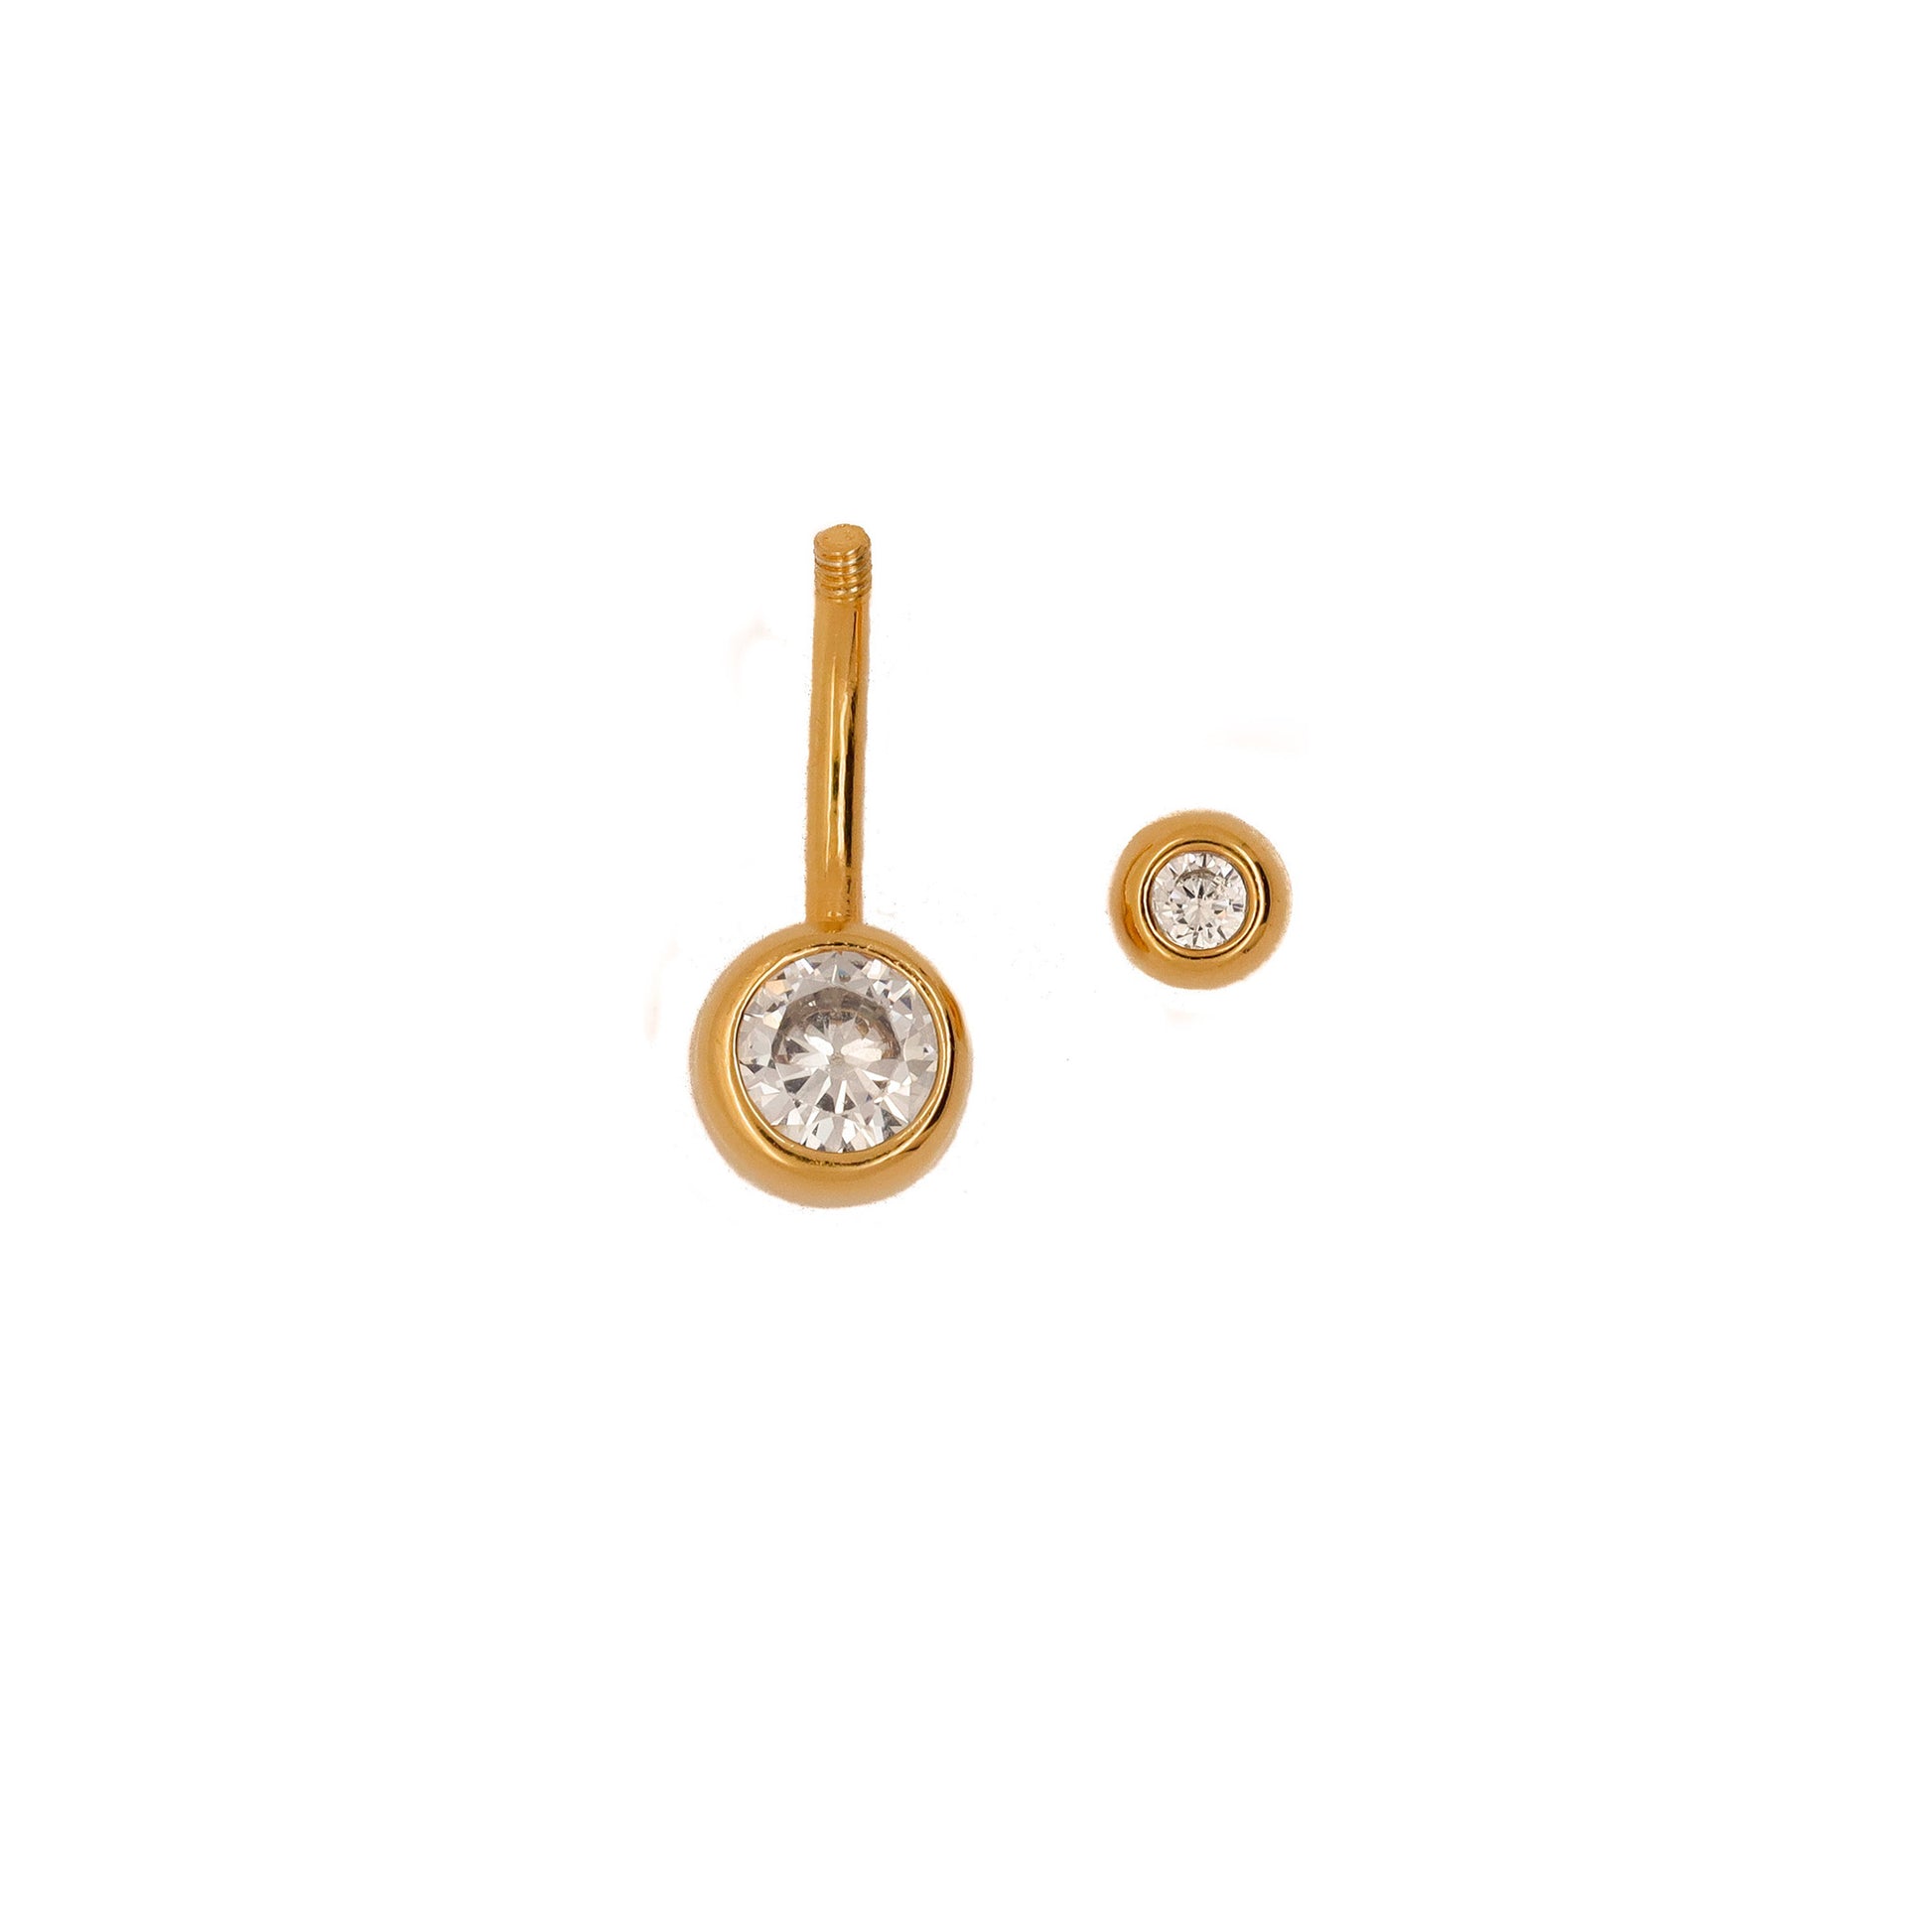 Vermeil | 925 Silver 24k Gold Coated Double Jeweled Belly Ring | 6mm 1/4" 8mm 5/16" 10mm 3/8" - Sturdy South